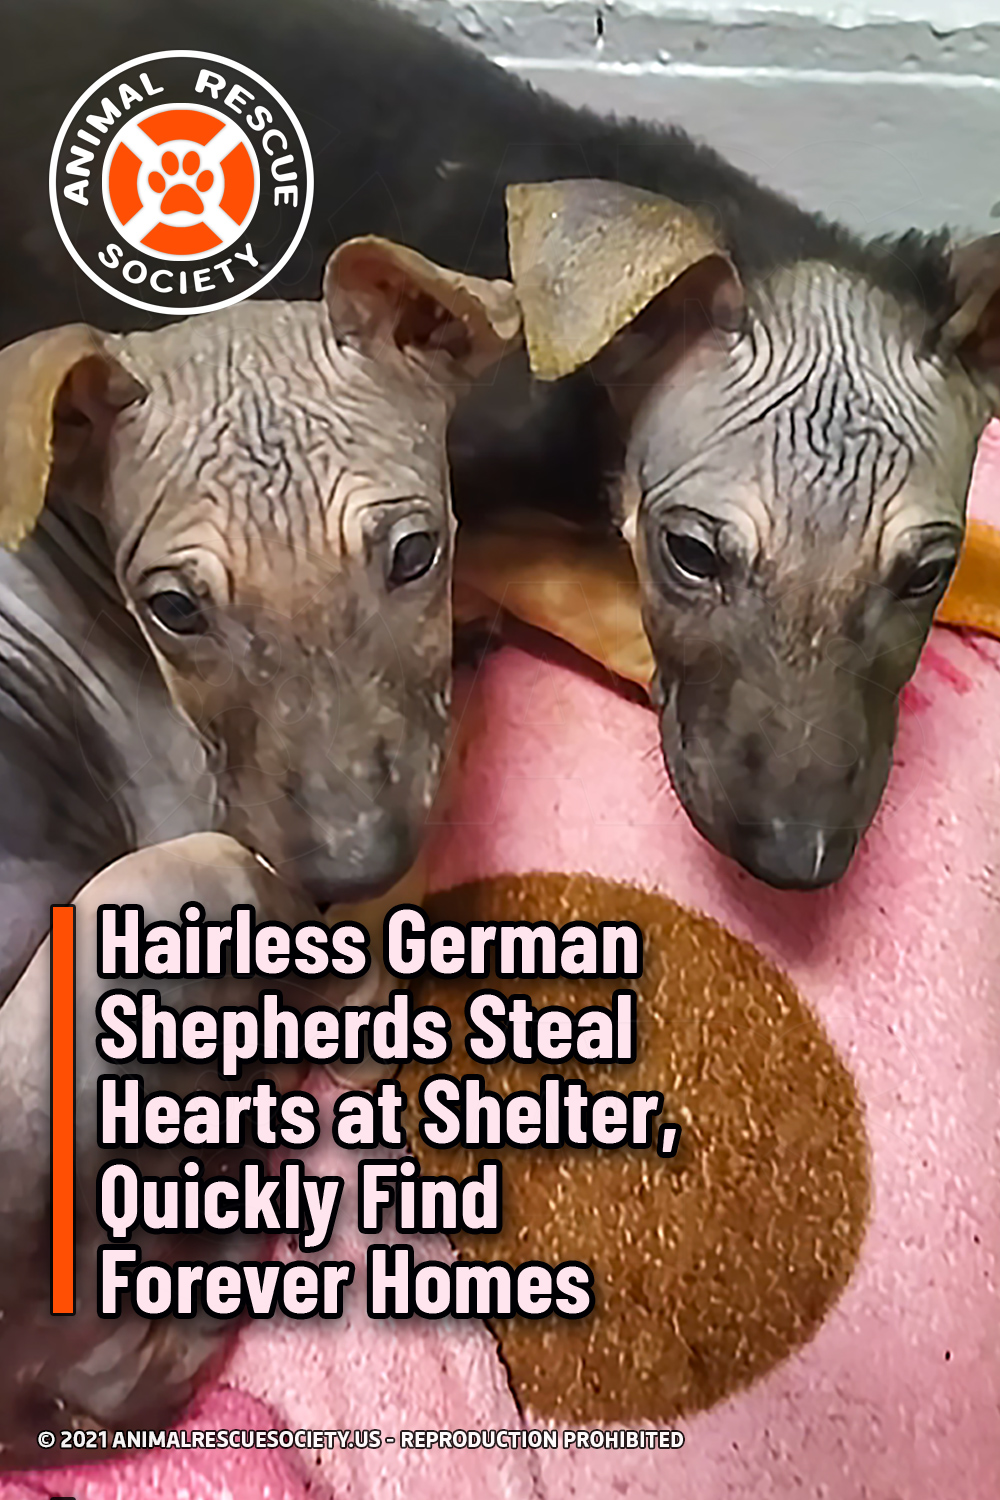 Hairless German Shepherds Steal Hearts at Shelter, Quickly Find Forever Homes